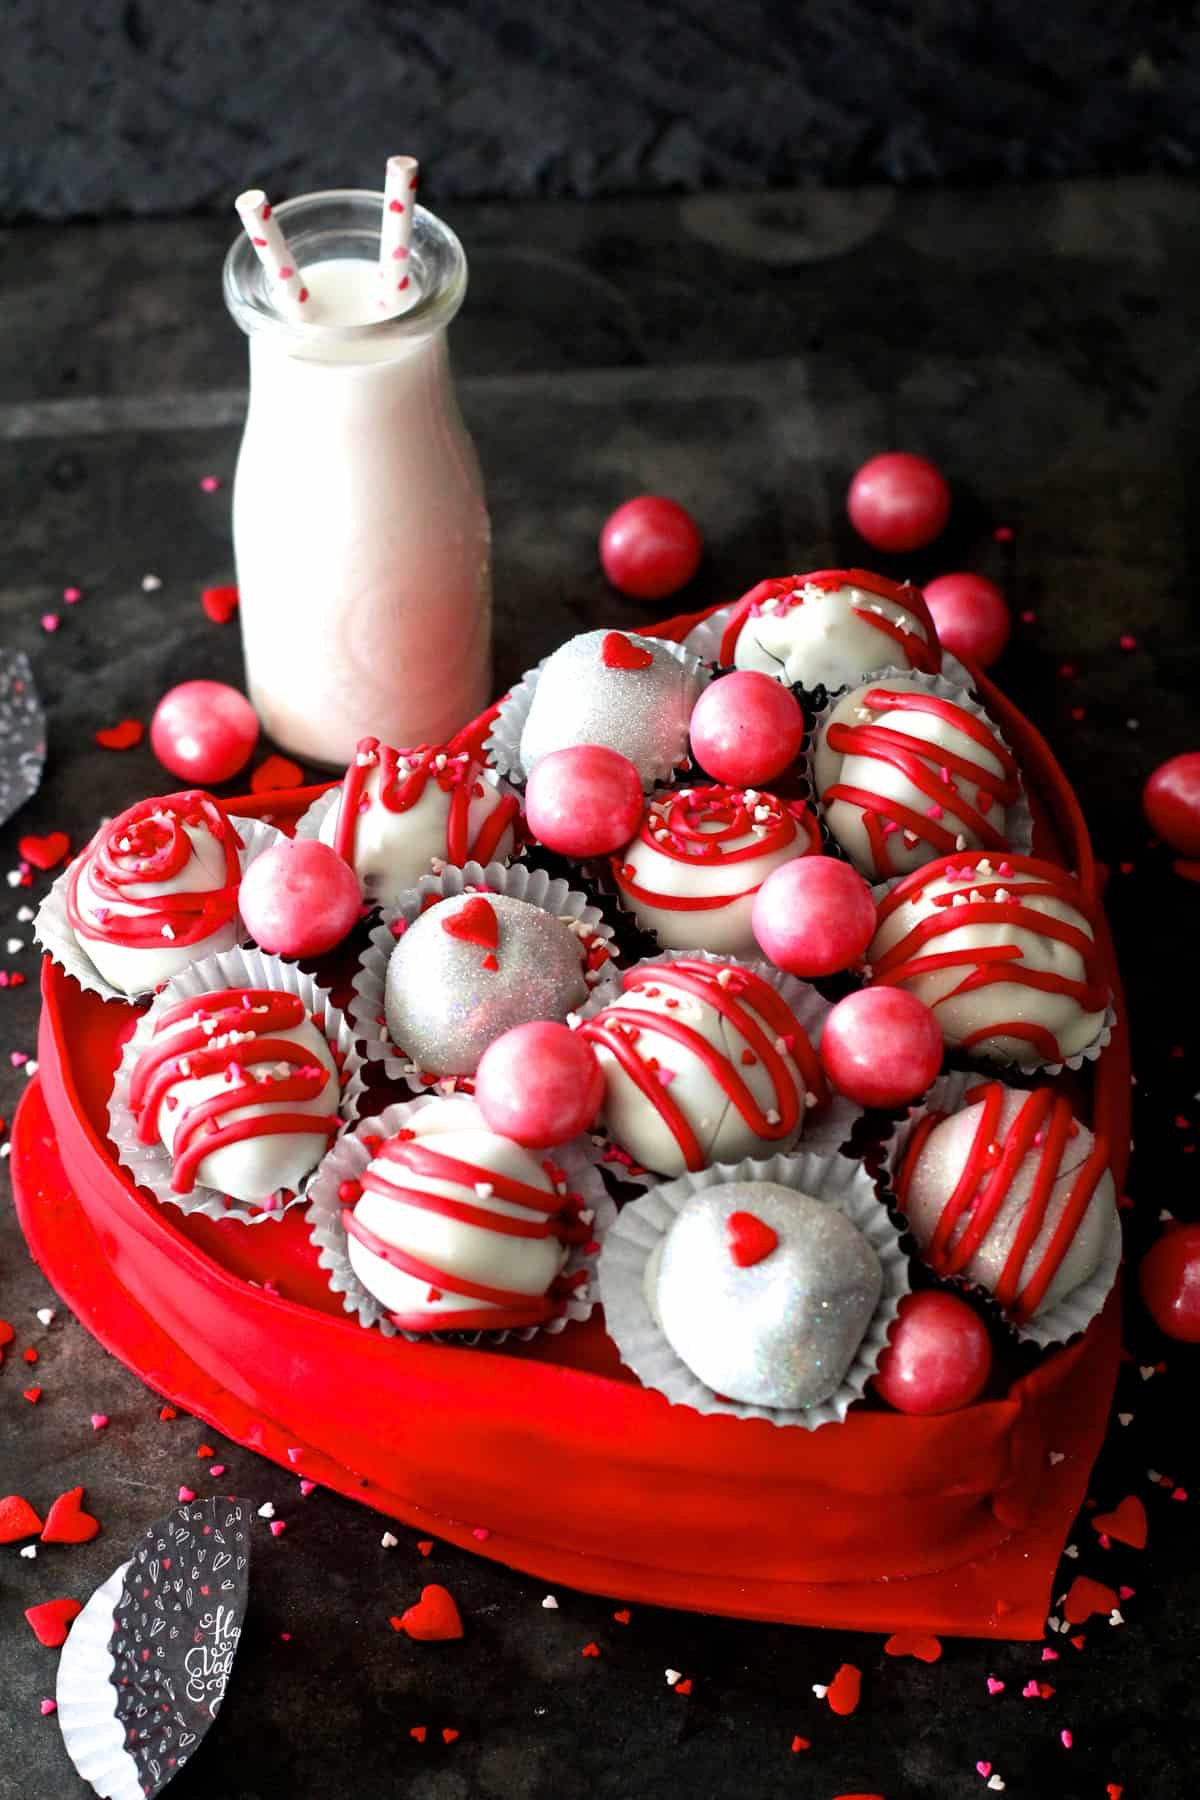 What is Valentine's day without a heart shaped box full of chocolates? Well this year, instead of buying one, make a completely edible heart box and fill it with fun cake balls. 